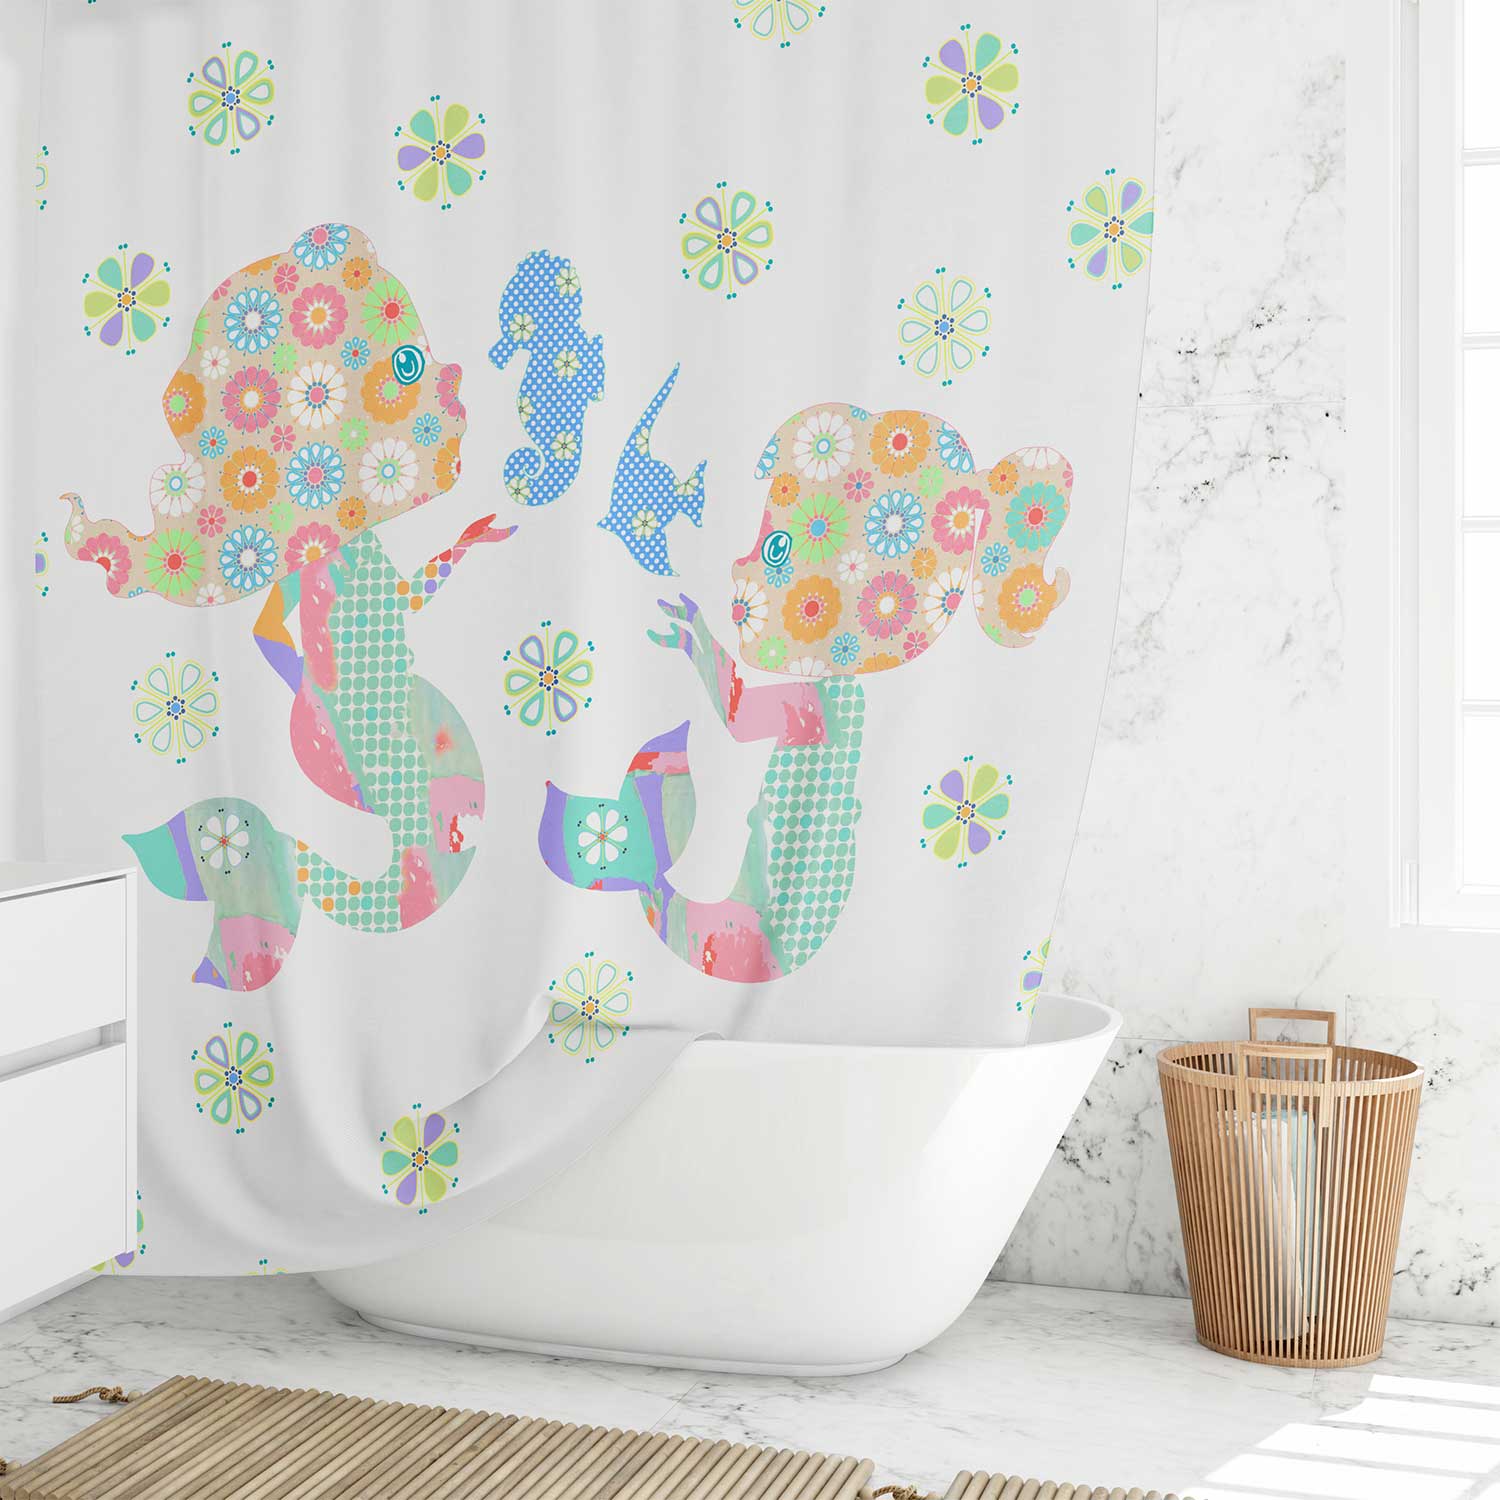 Little Mermaid Shower Curtain For Children And Sibling Bathrooms